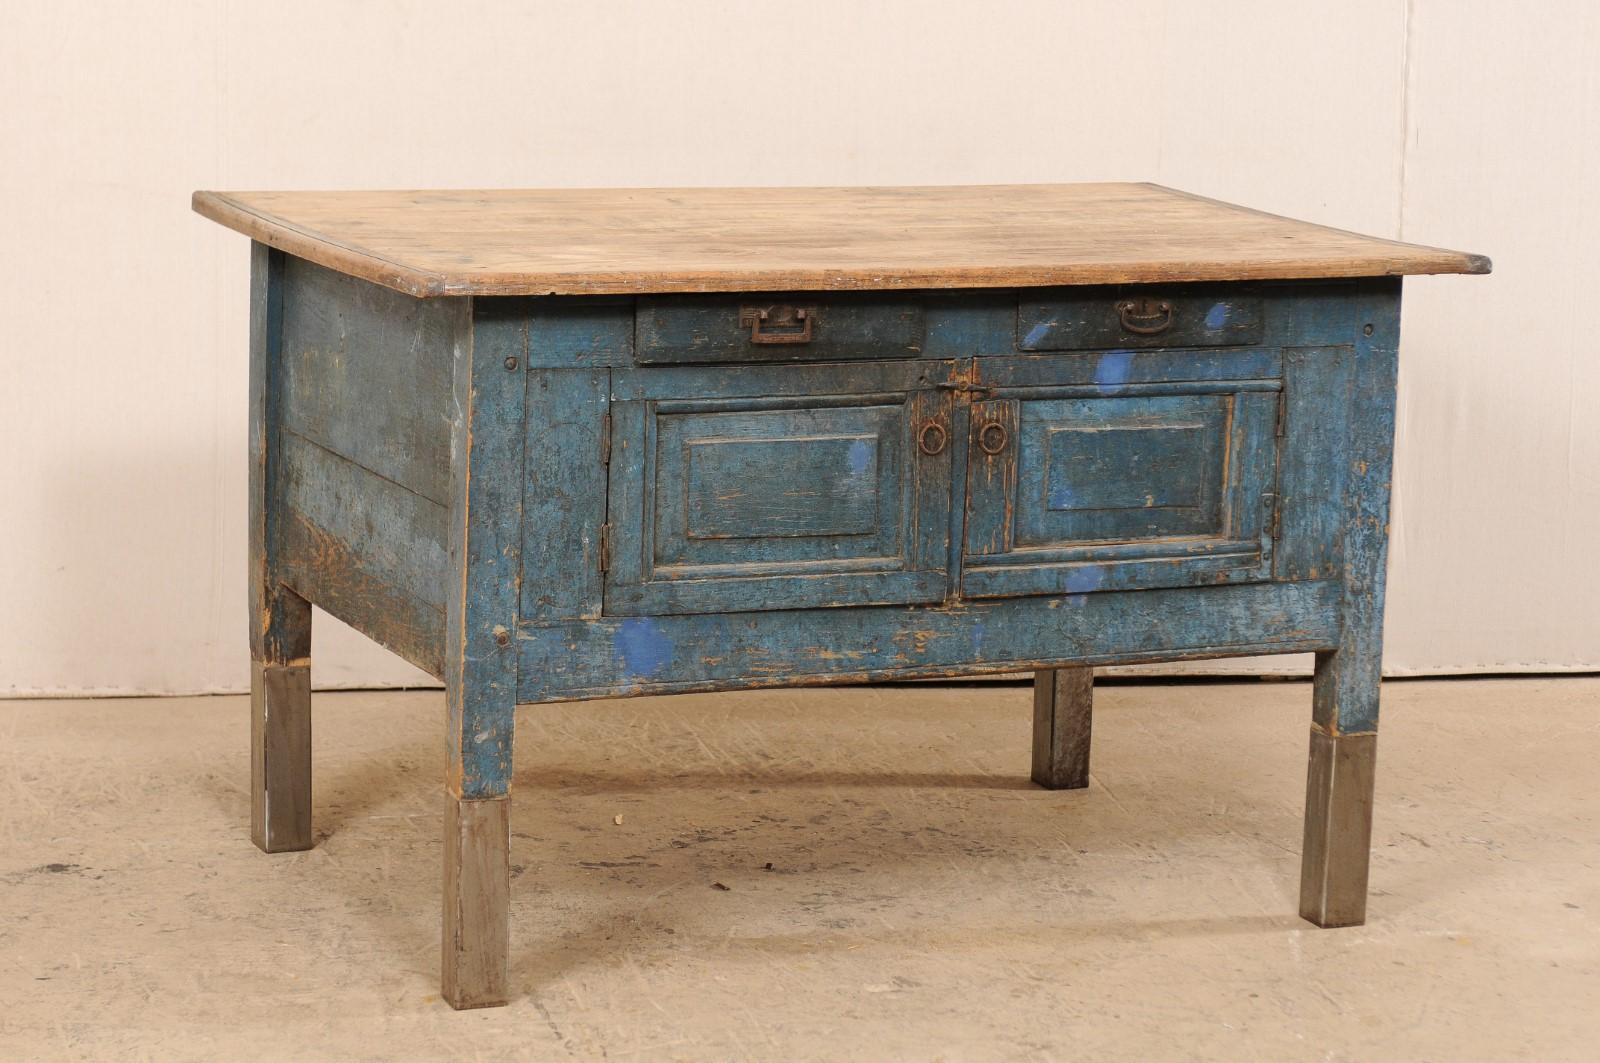 A European workbench or table from the late 19th century with contemporary additions. This antique farmhouse style table from Europe features a rectangular-shaped overhanging top, above a deeply set apron which houses two small drawers over a pair